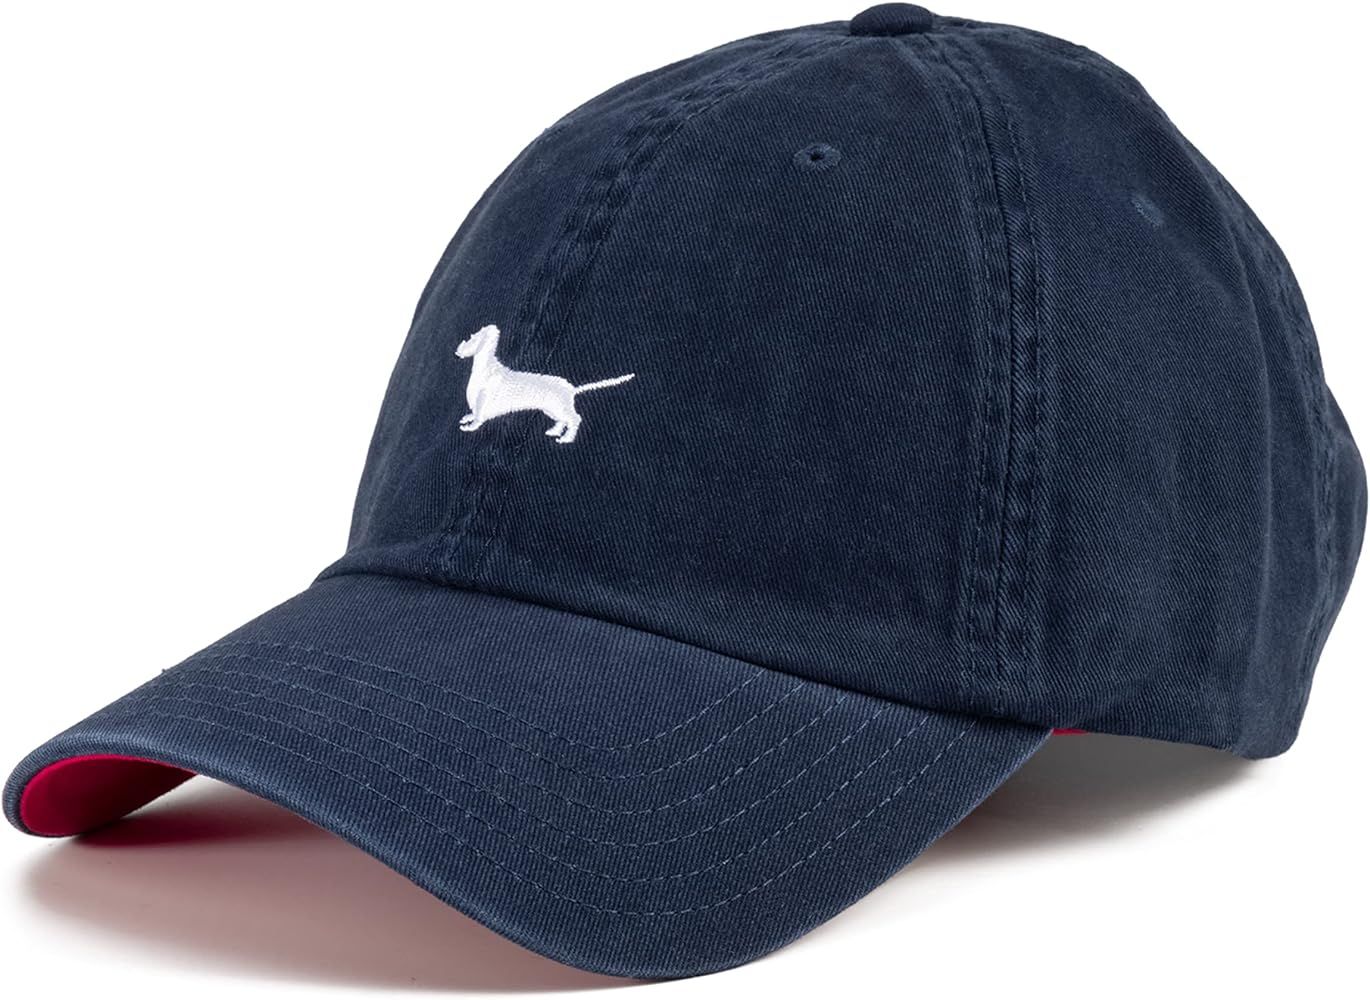 ORTC Dachshund Cap - Classic Baseball Cap with Strap - 100% Brushed Cotton Twill - One Size Fits ... | Amazon (US)